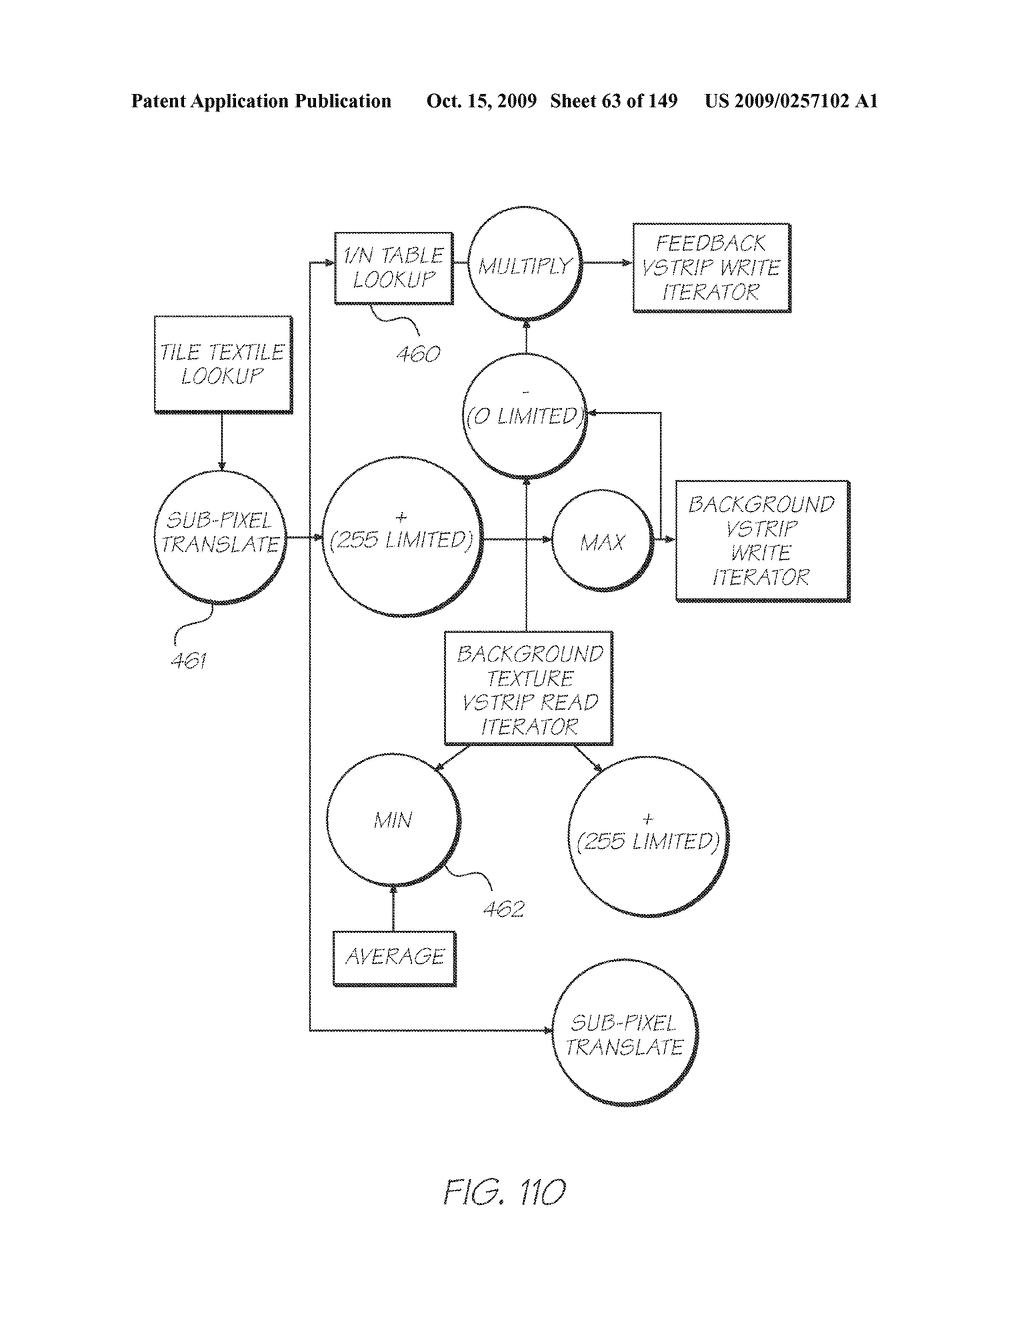 IMAGE PROCESSING APPARATUS HAVING CARD READER FOR APPLYING EFFECTS STORED ON A CARD TO A STORED IMAGE - diagram, schematic, and image 64